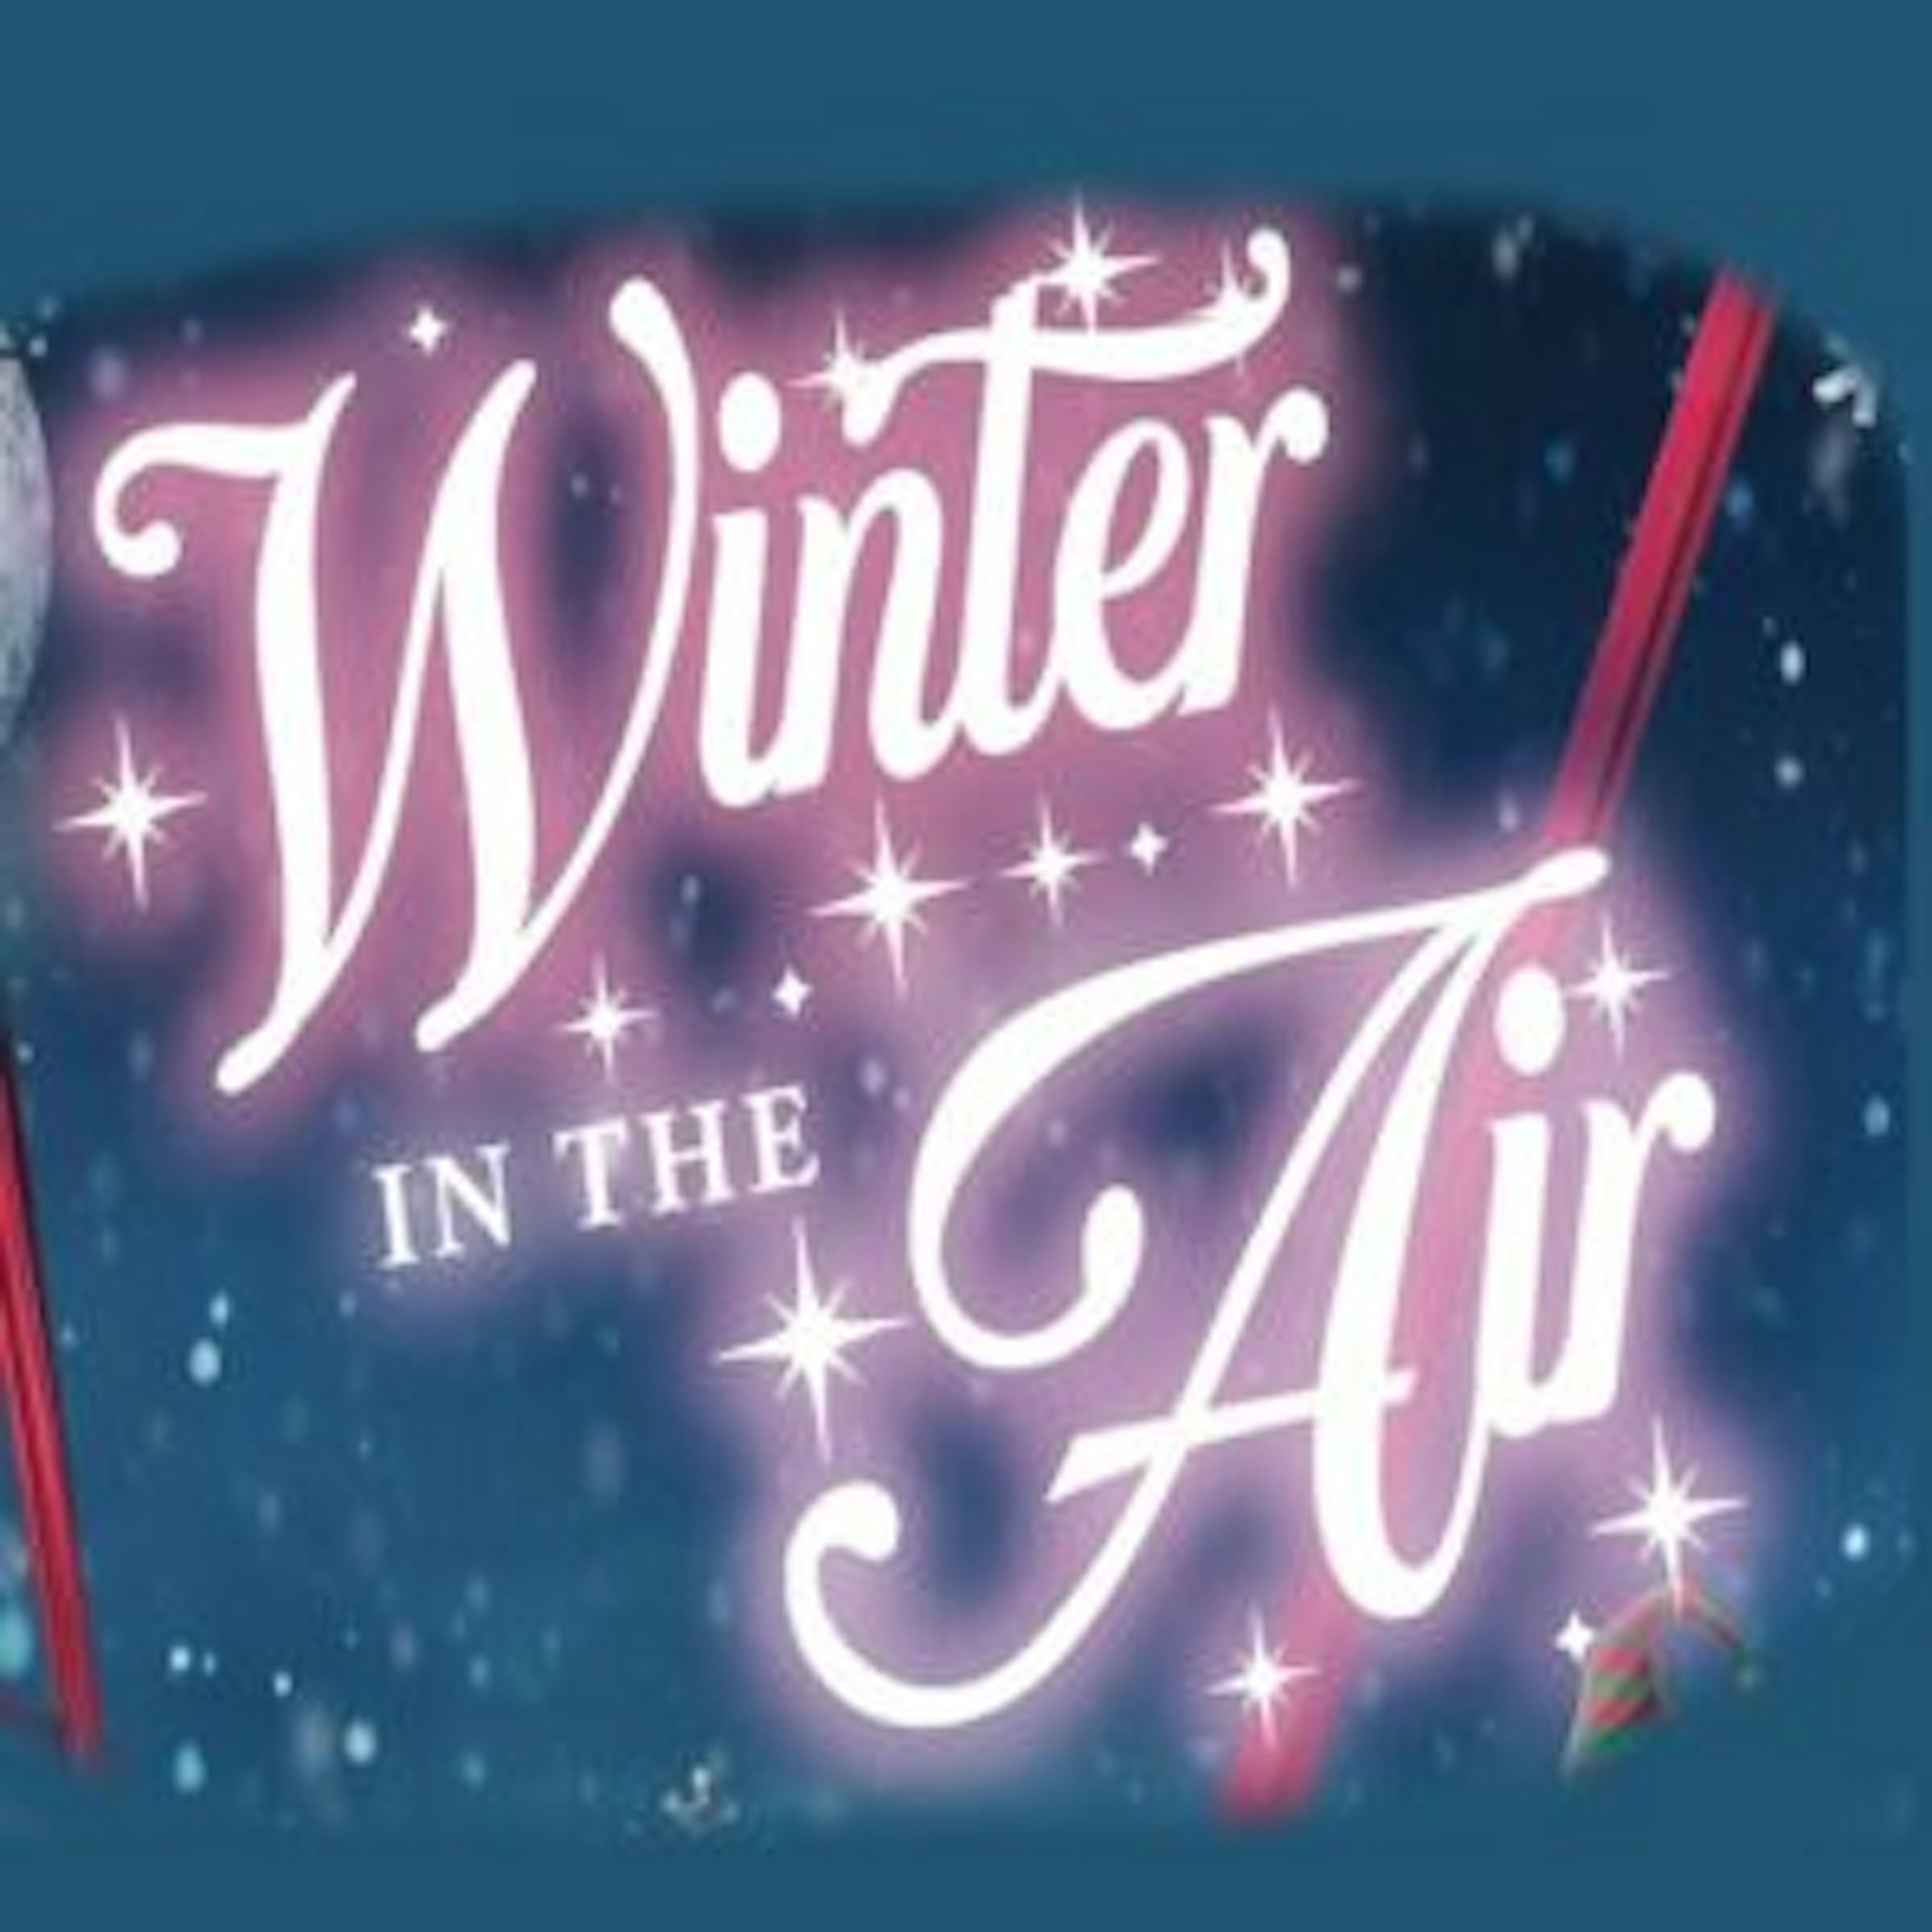 Broadway Theatre and Le Grand Cirque present WINTER IN THE AIR